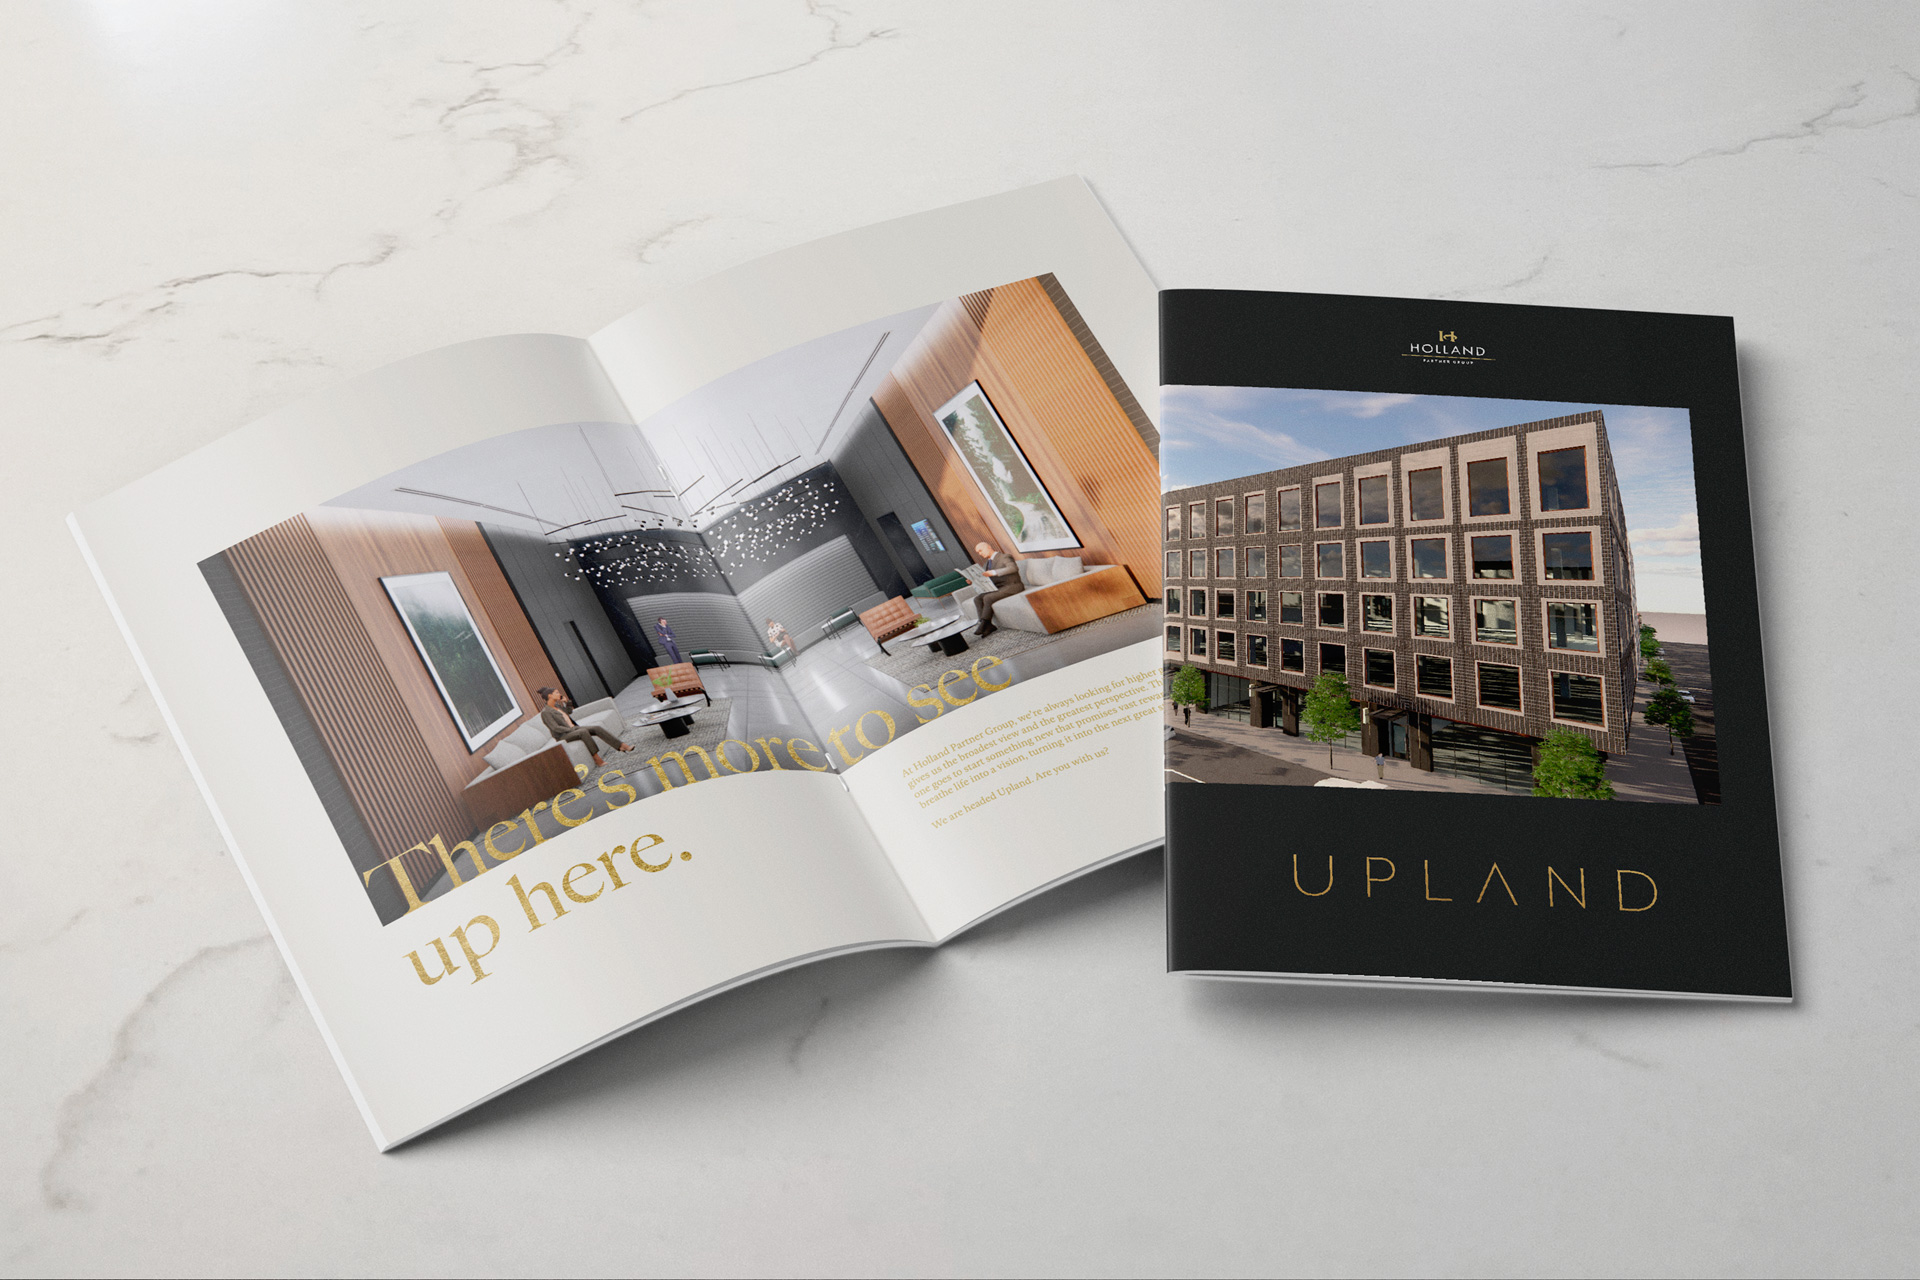 Upland Brand Book Logo folder mockup created by Incubate Design for Holland Residential